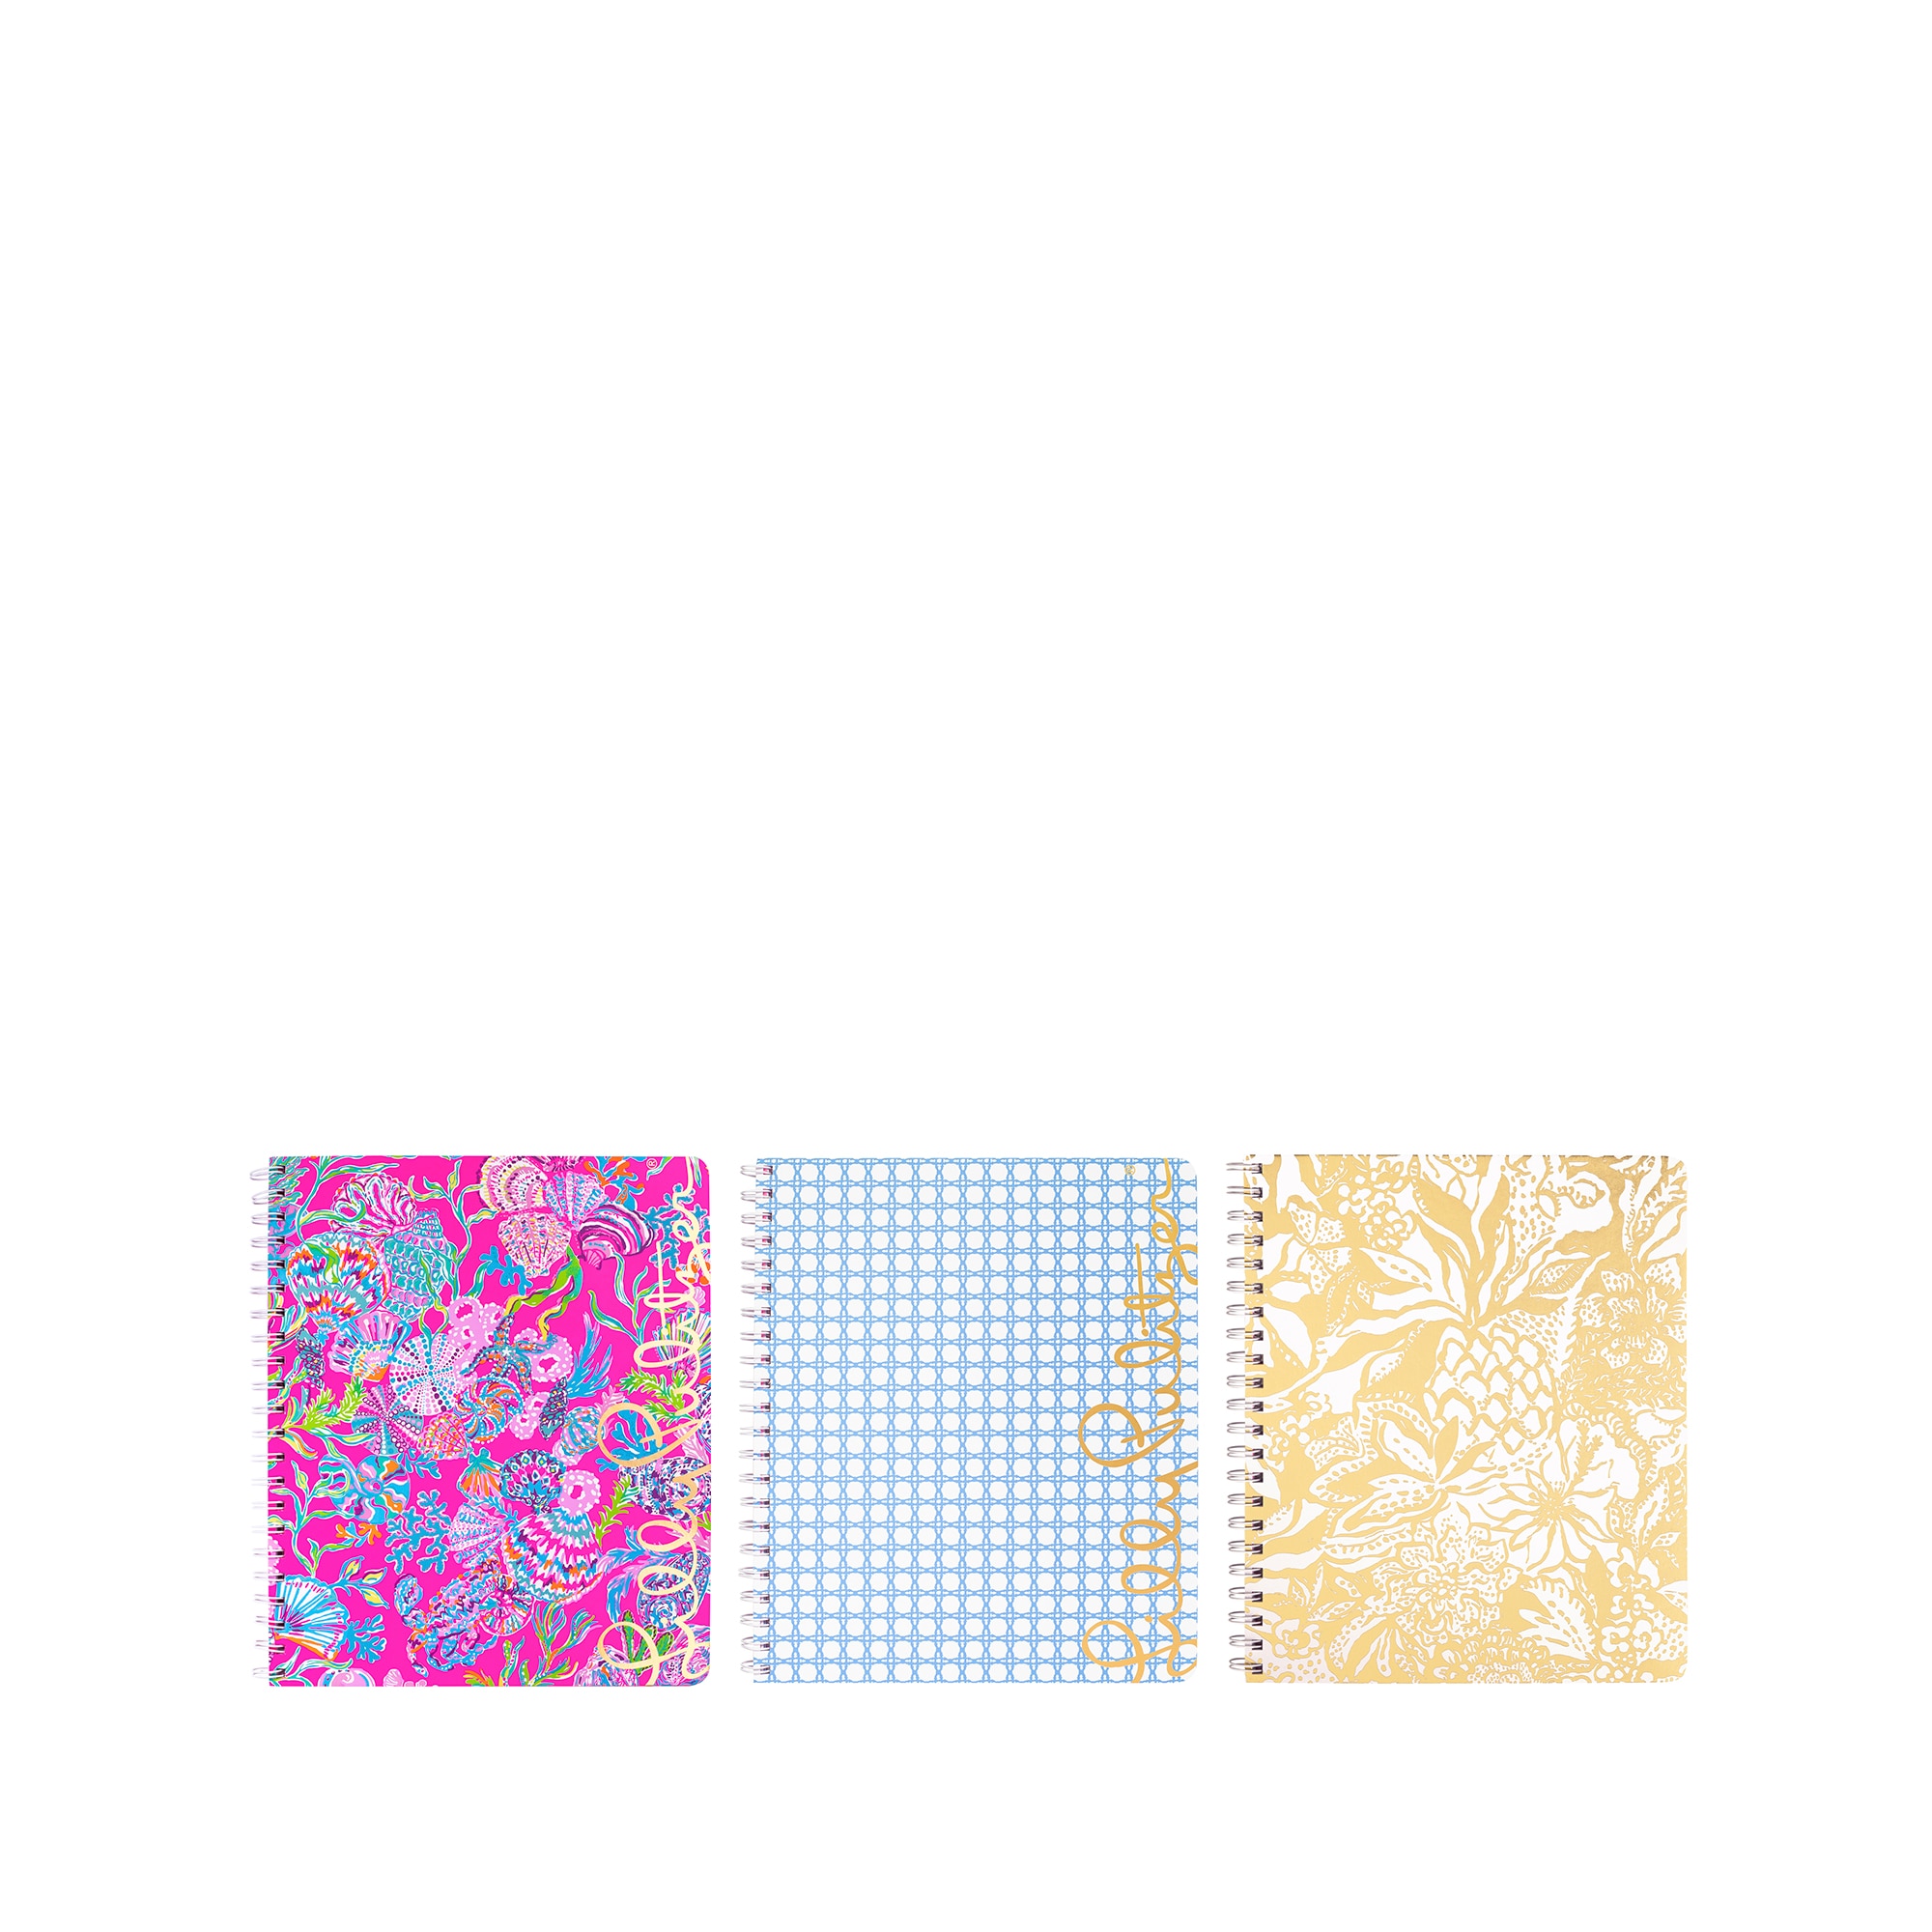 Lilly Pulitzer Large Notebook Set of 3, Shell Me/Sangria/Caning